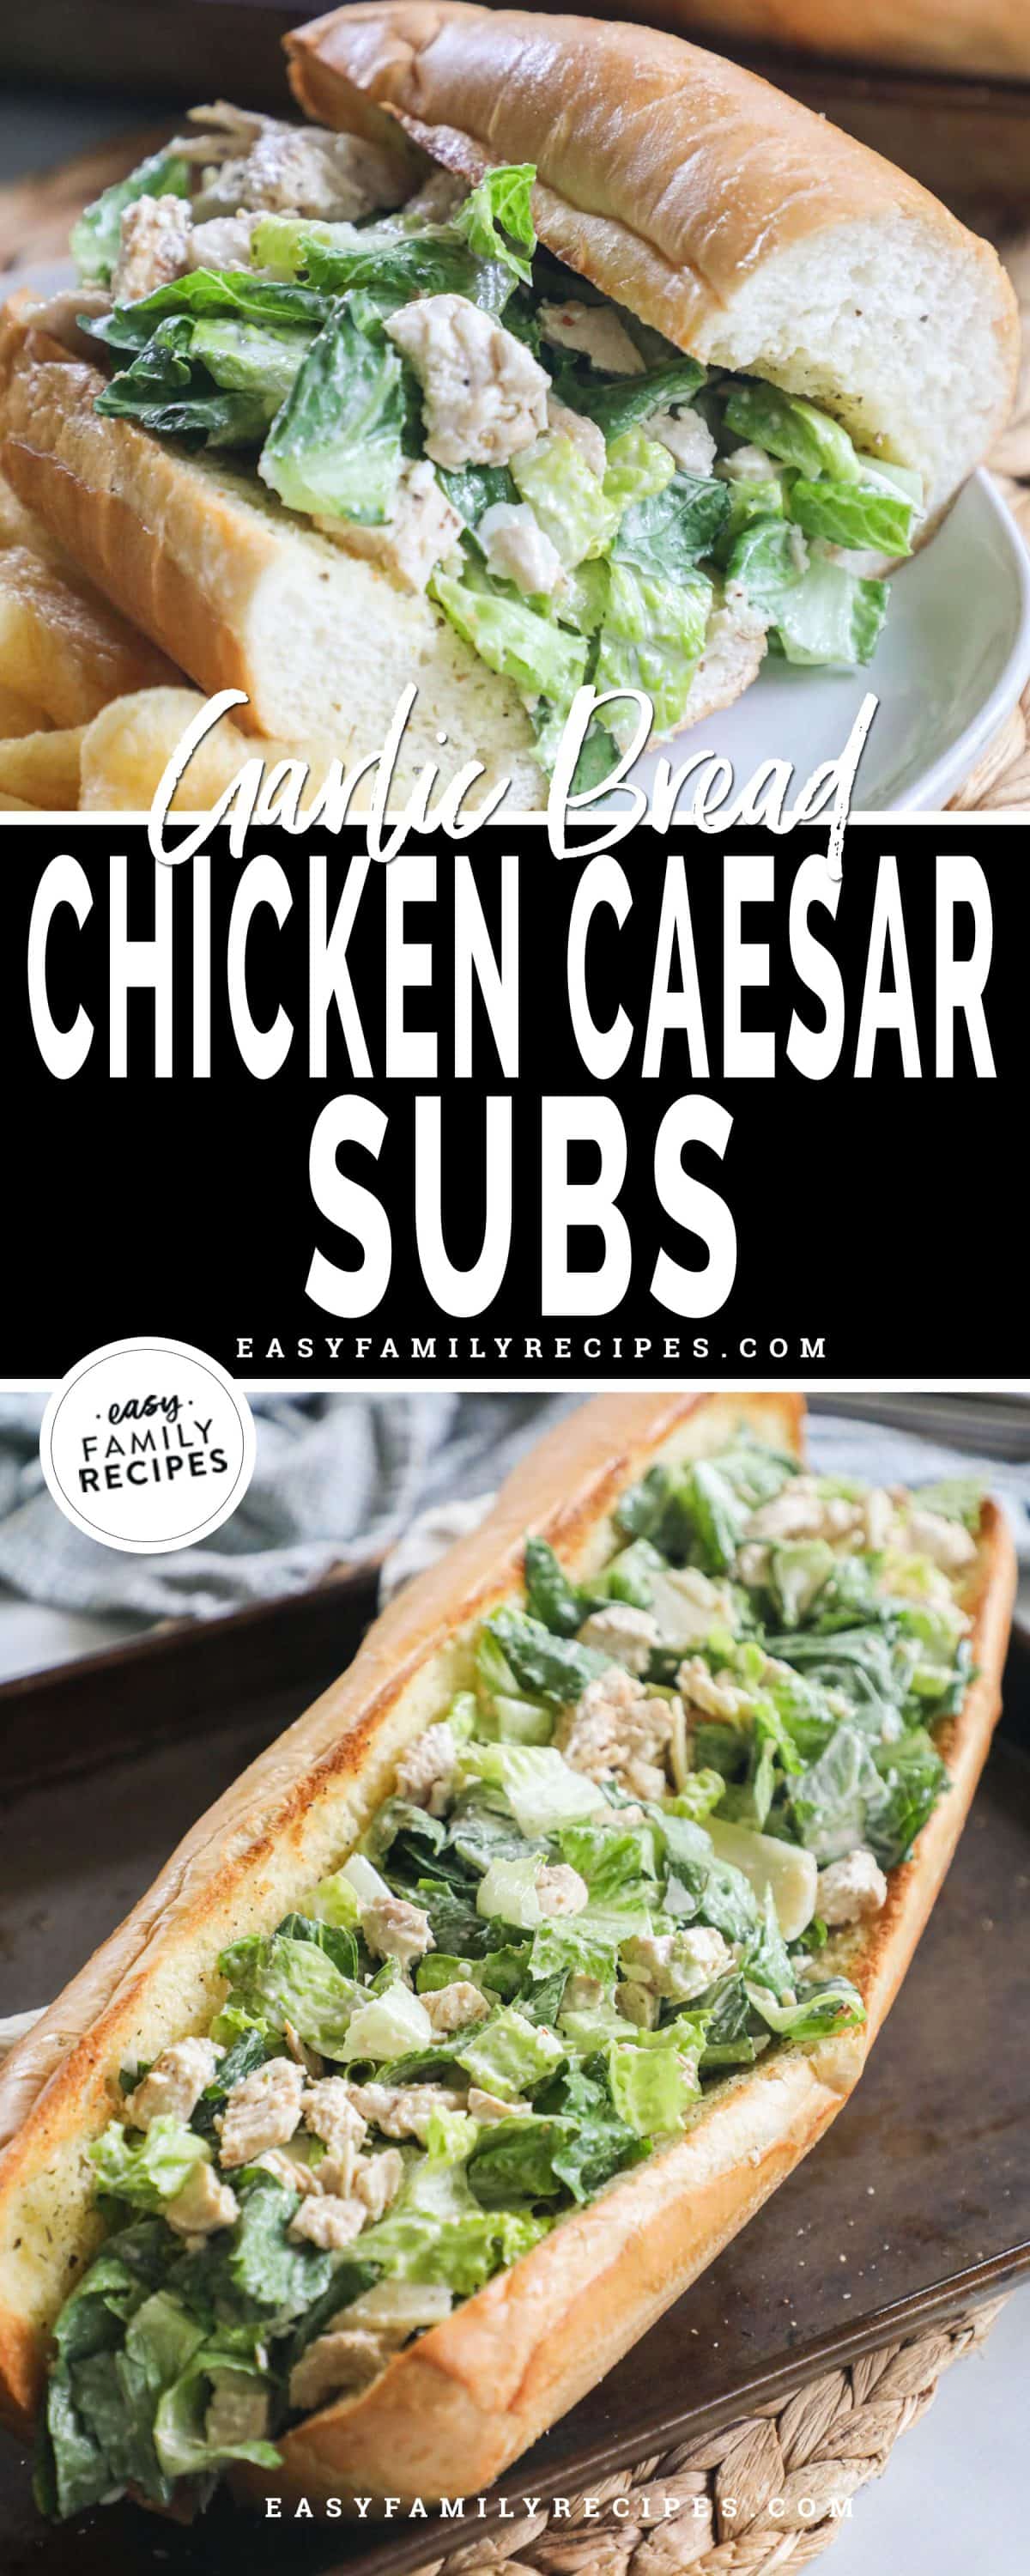 Chicken Caesar Sandwich made on french bread and cut into individual sandwiches